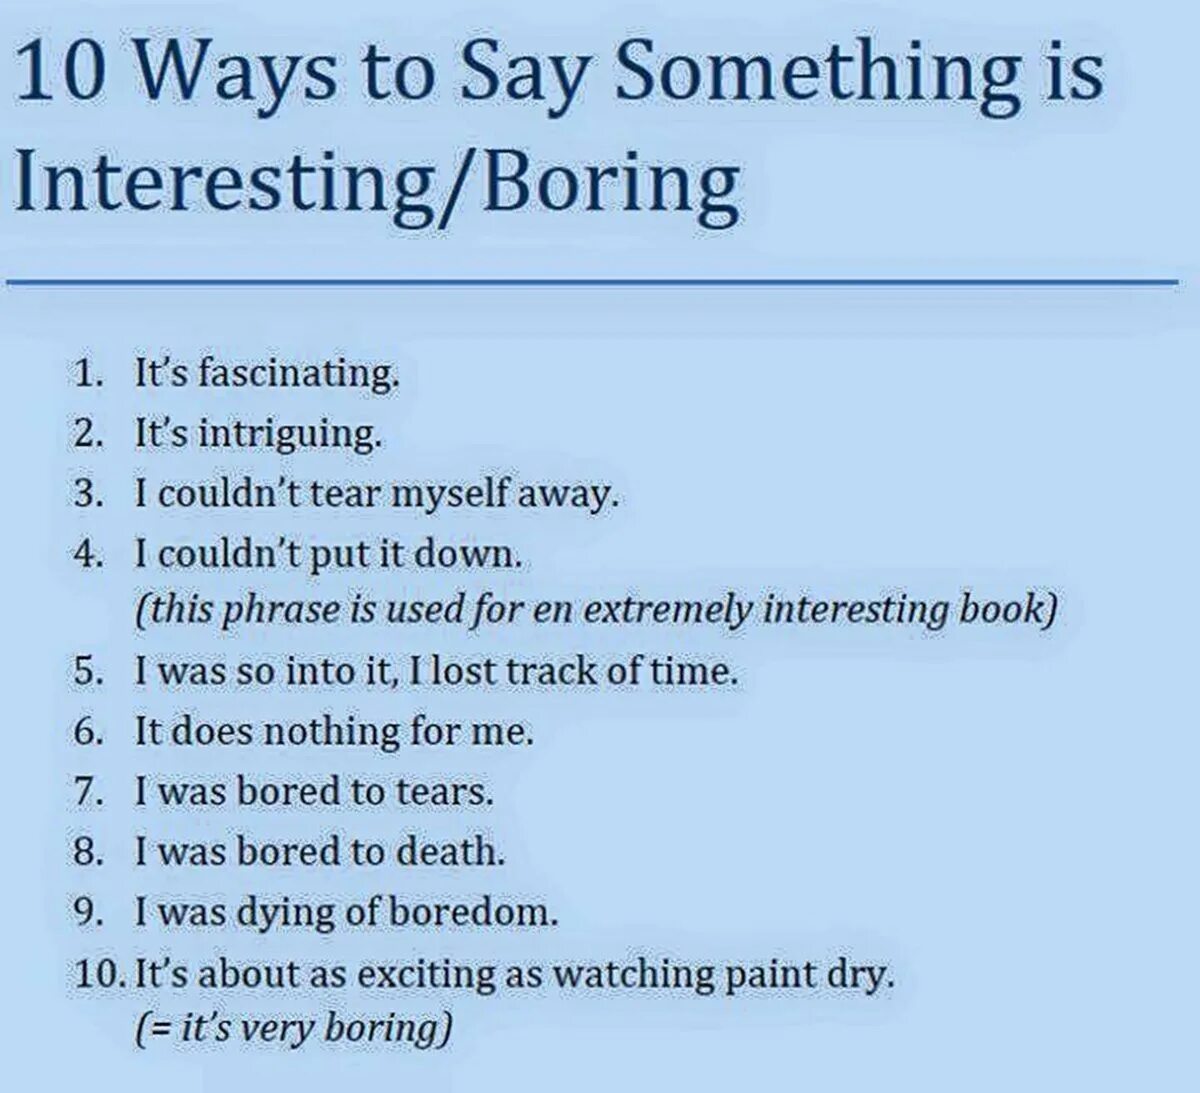 Like ways to say. Interesting phrases in English. Other ways to say interesting. Other ways to say. Other ways to say say.